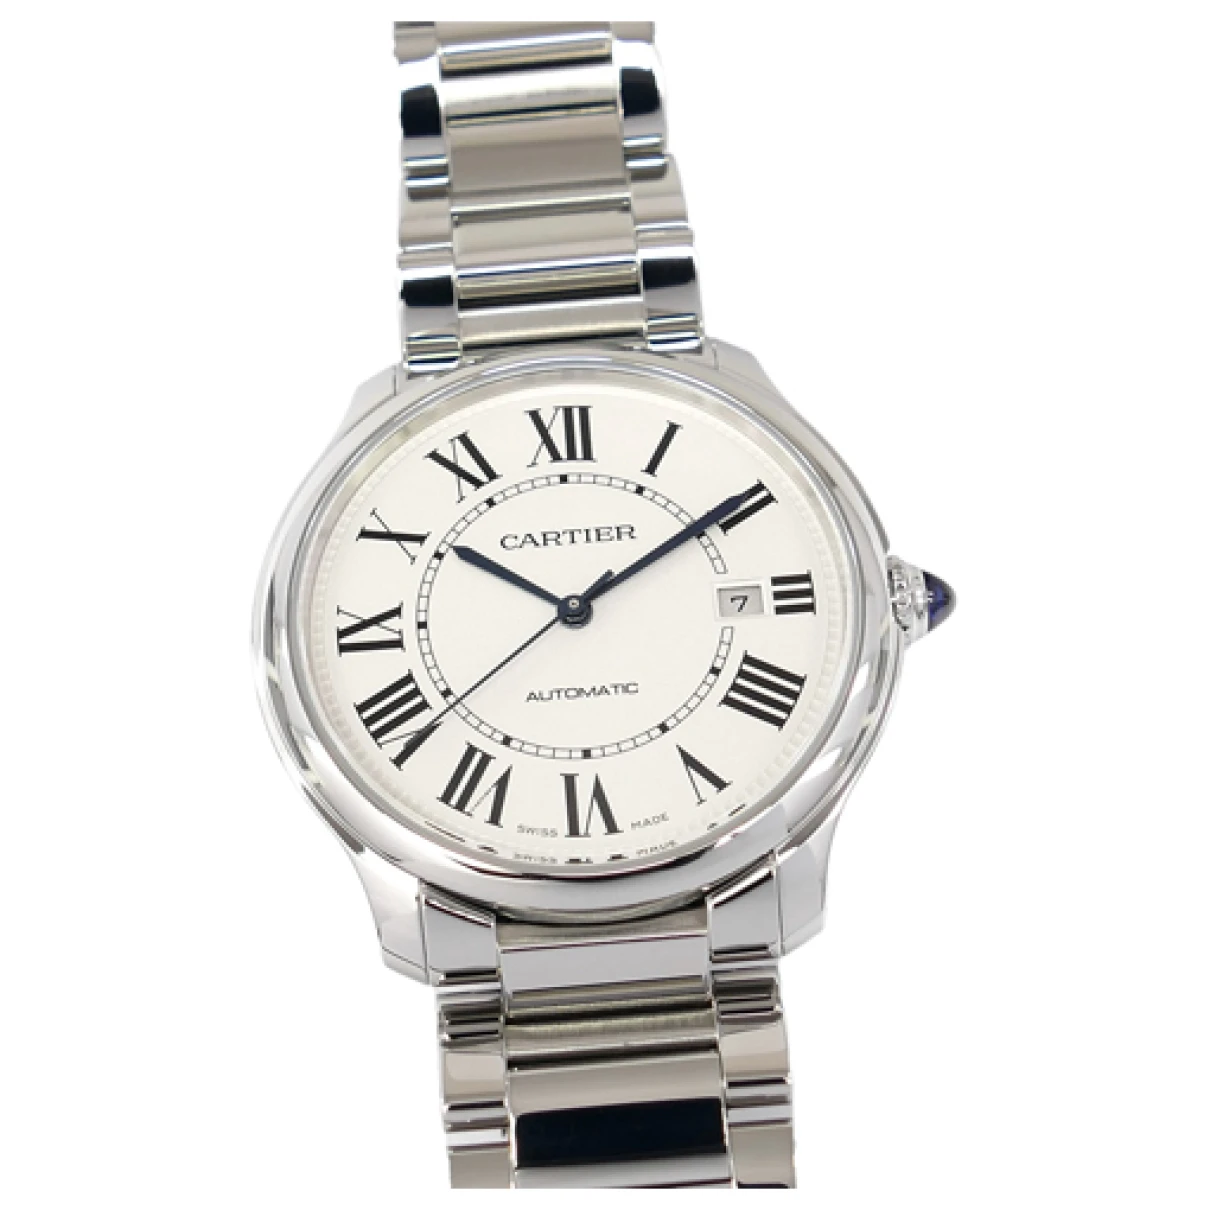 Pre-owned Cartier Watch In Silver